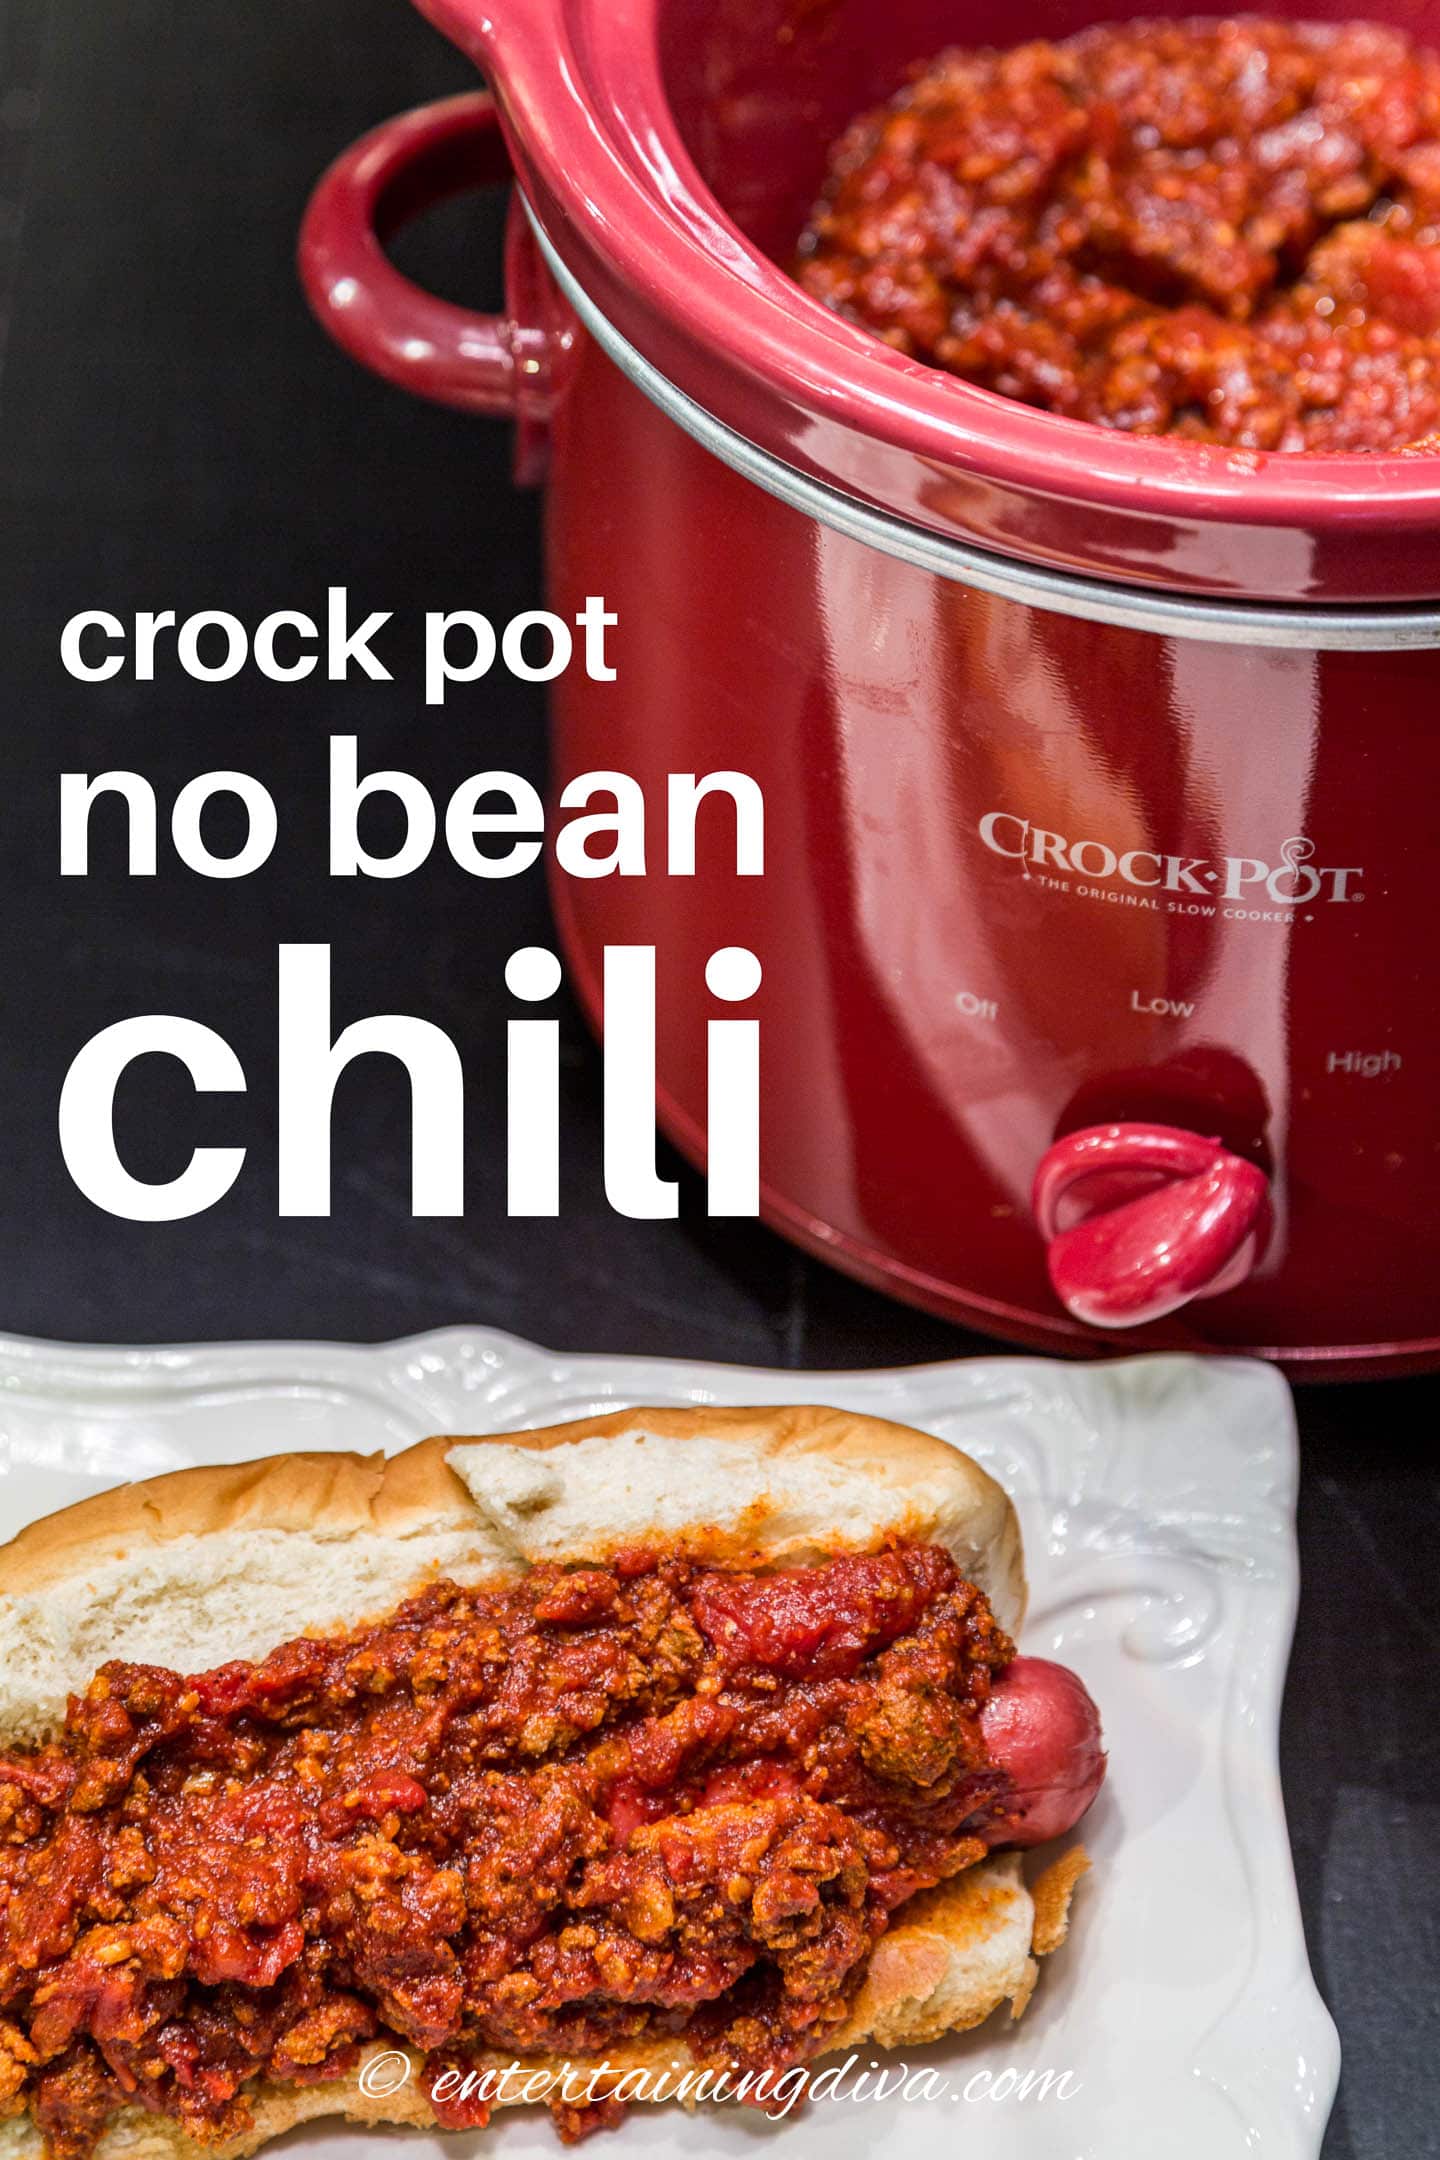 crock pot no bean chili on a hot dog in front of a slow cooker